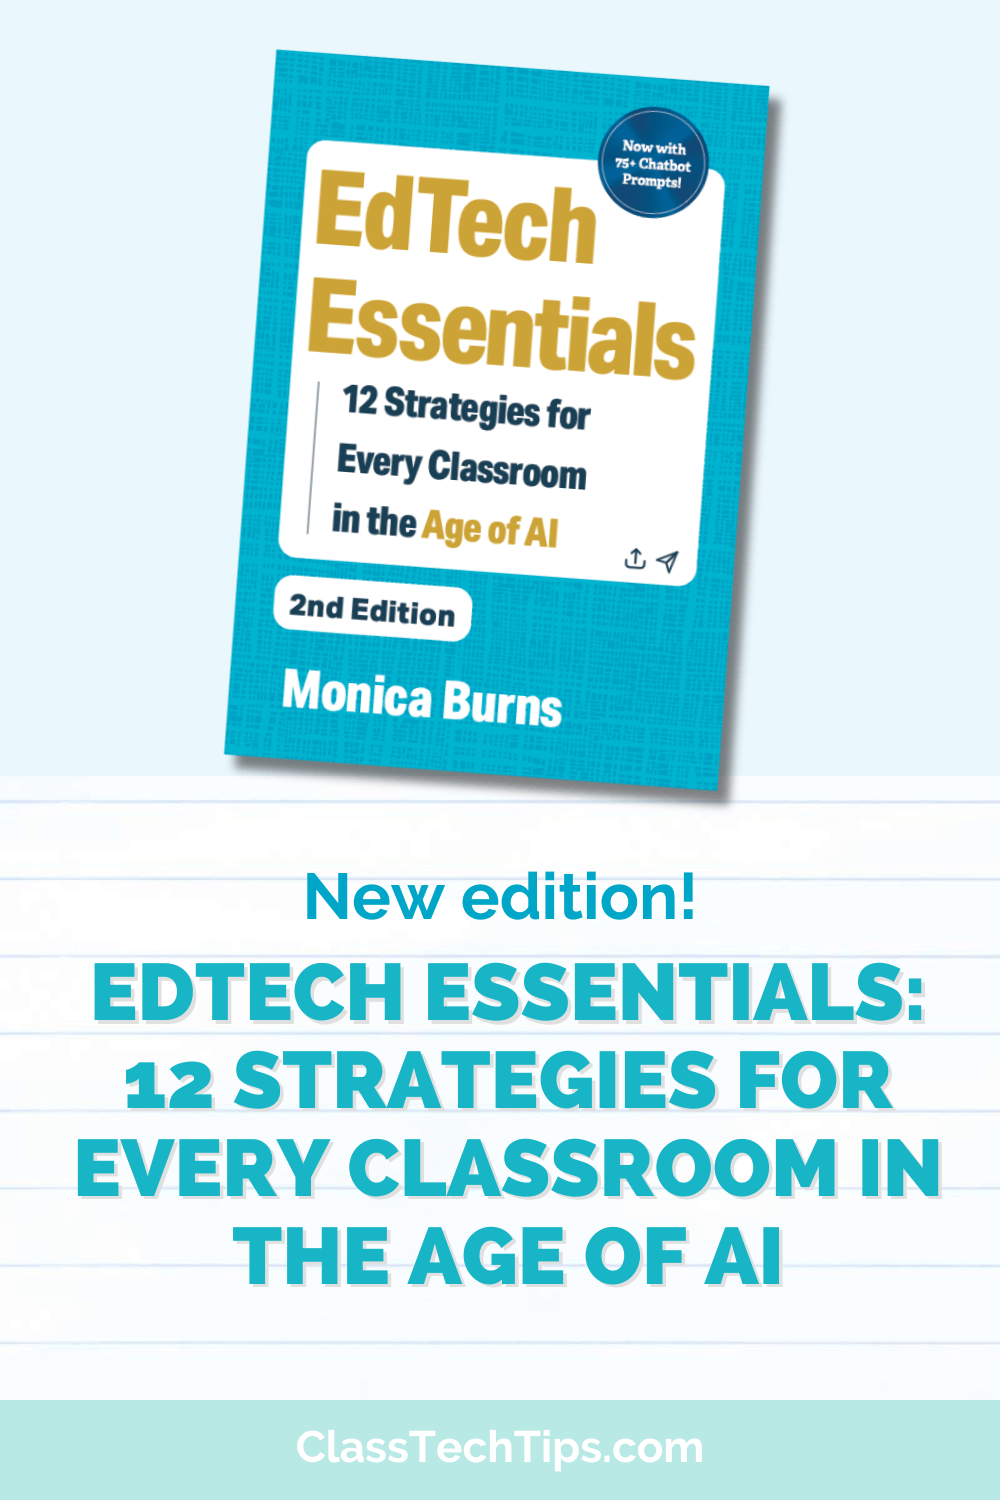 New edition of "EdTech Essentials" book by Monica Burns featuring 12 AI-driven strategies for every classroom. Learn what's new in the 2nd edition!